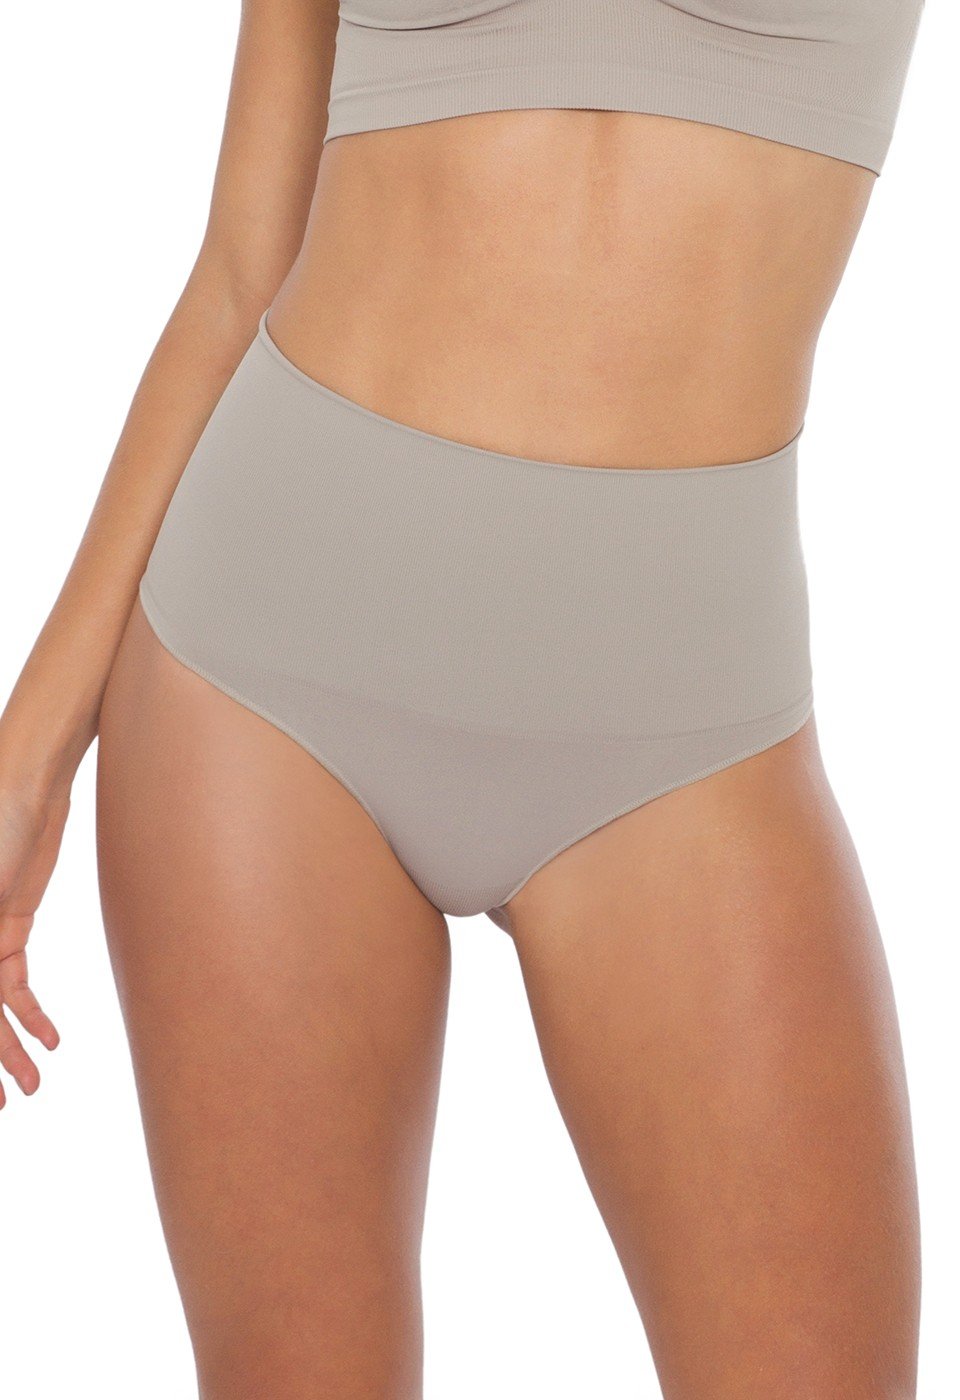 Plie Control Double Thread Body Shaping G-String Panties